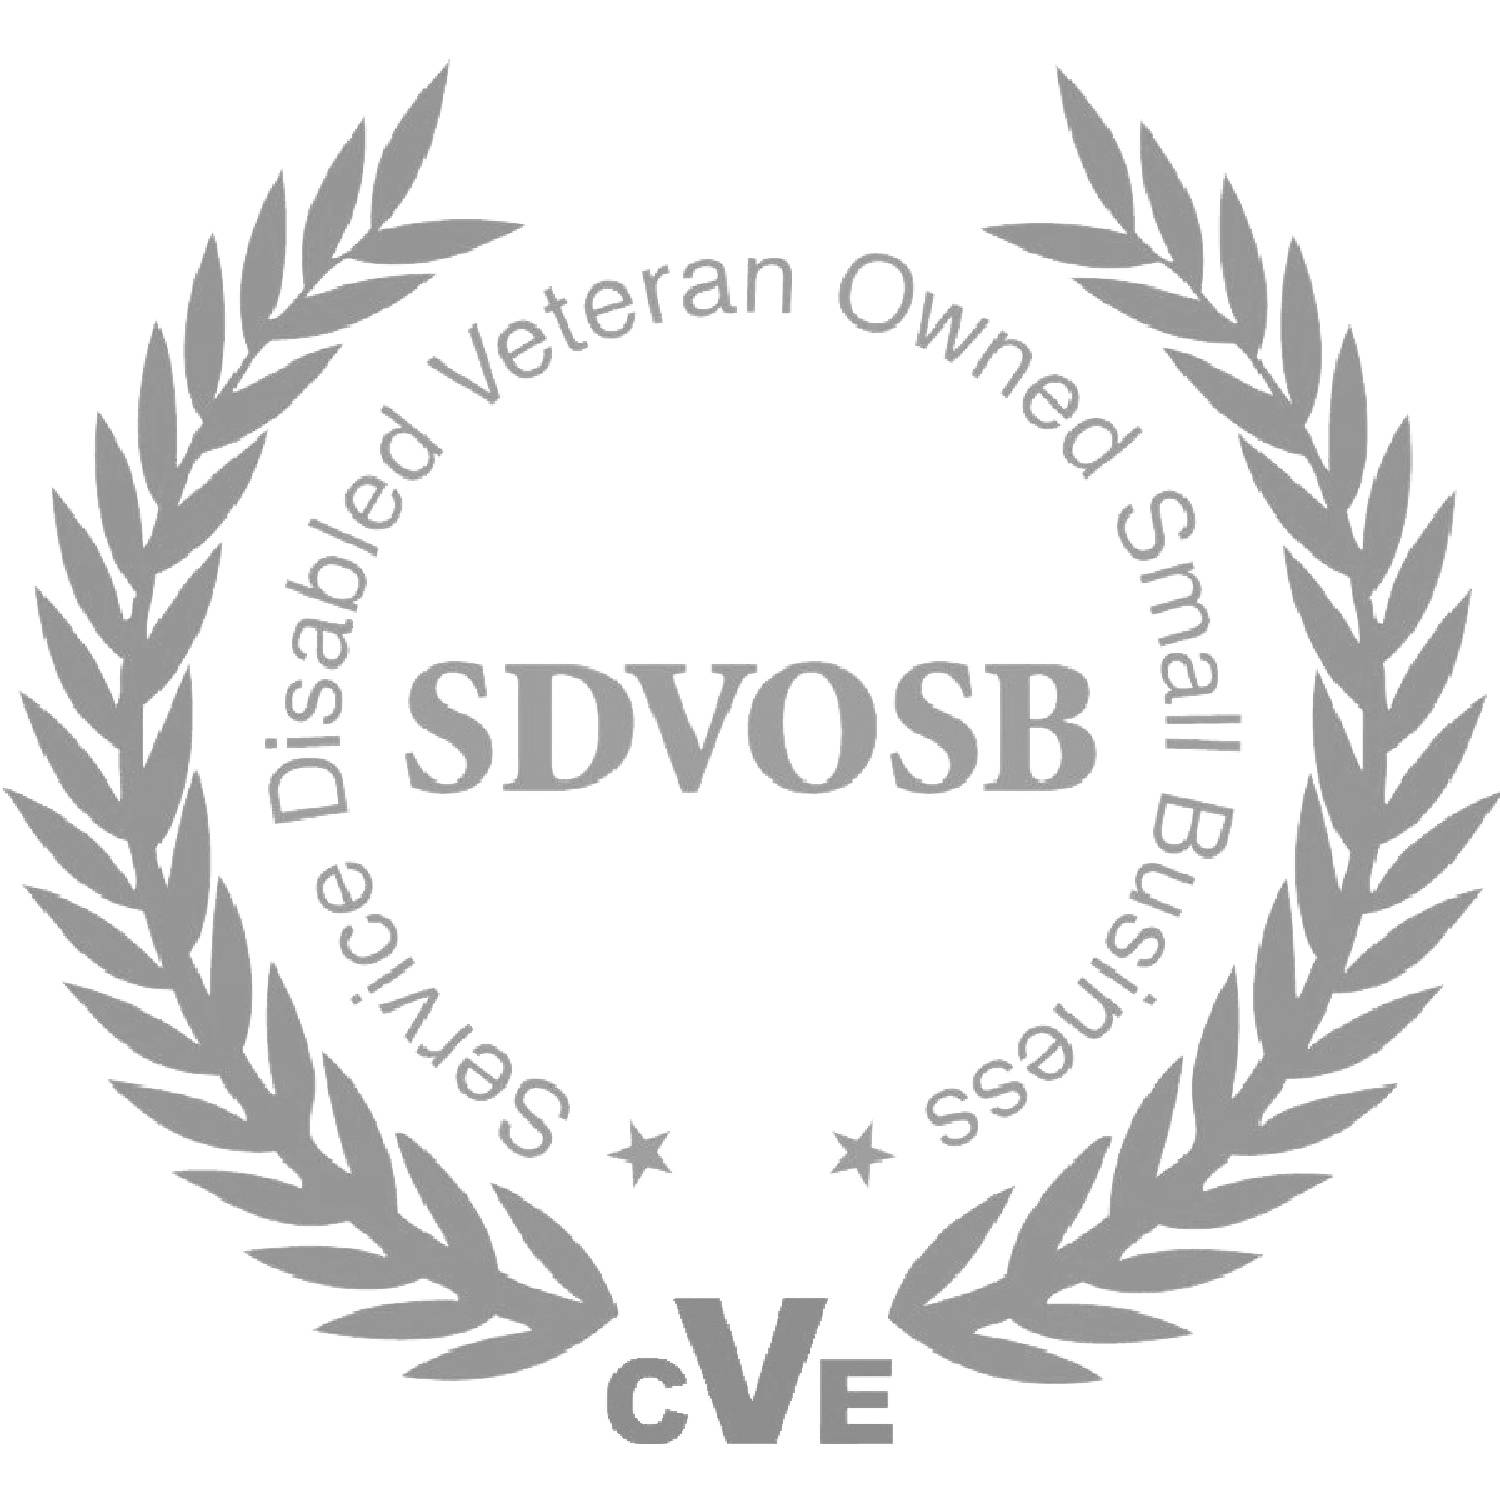 Service Disabled Veteran Owned Business